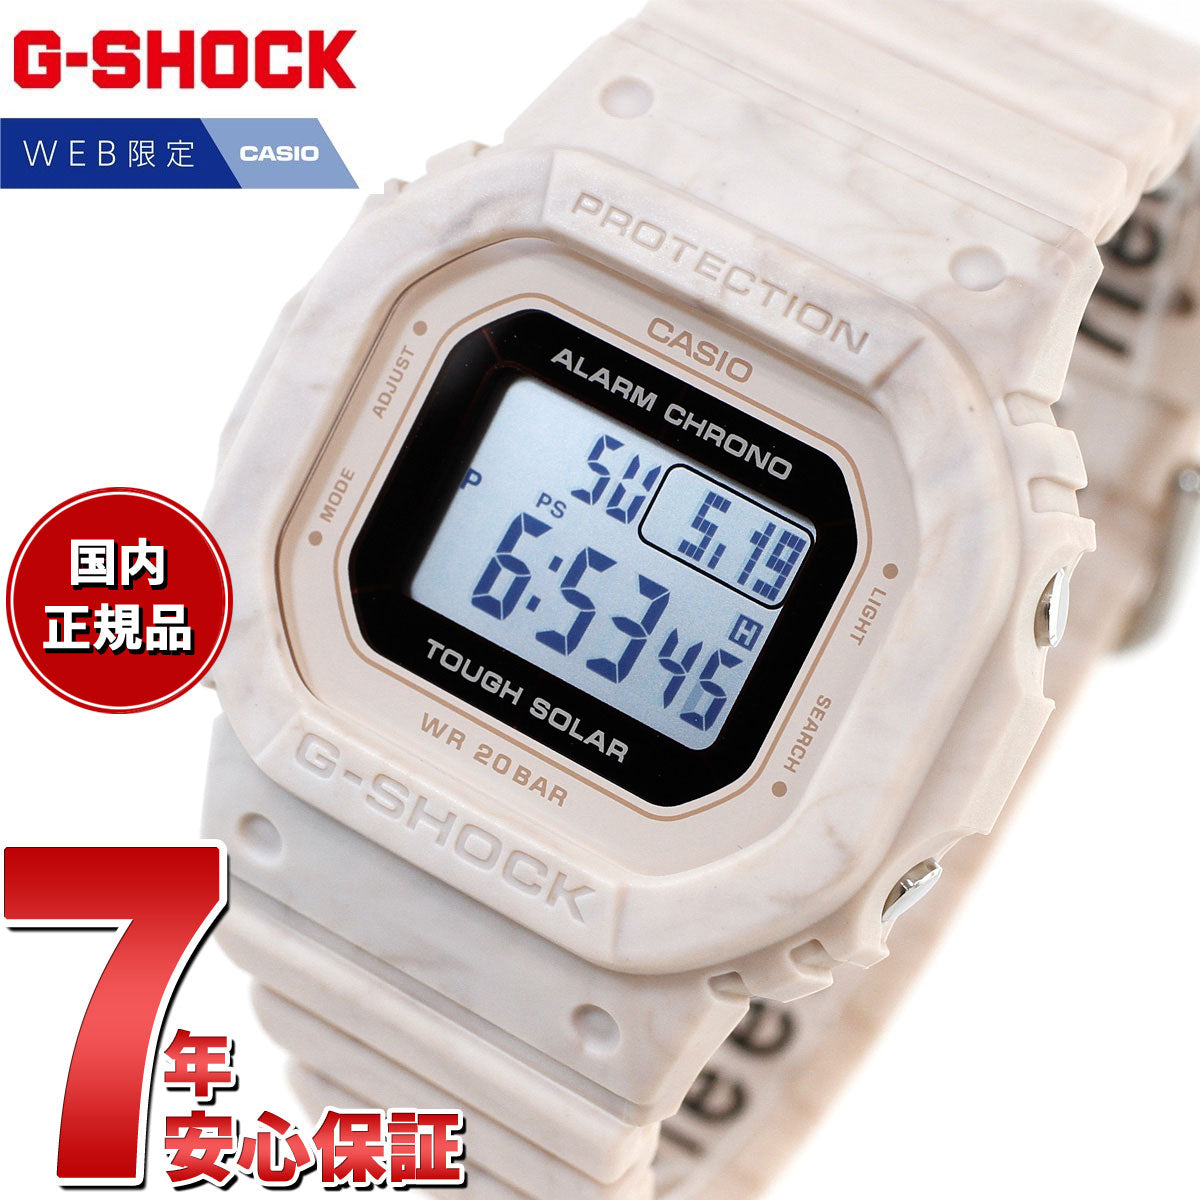 gms-s5600rt-4jf